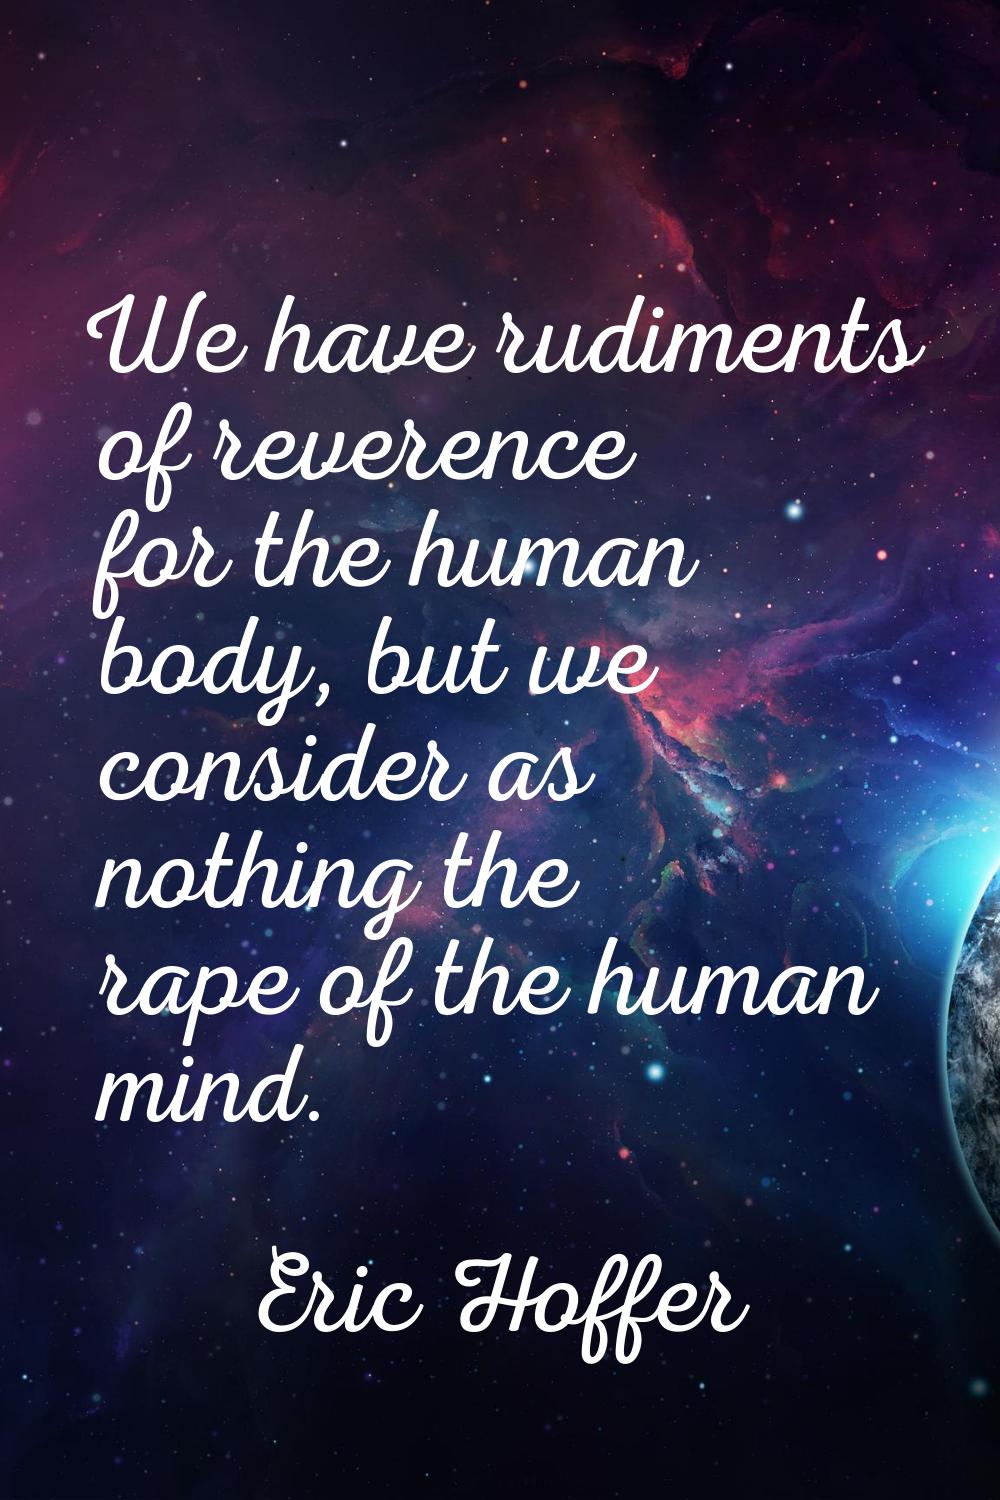 We have rudiments of reverence for the human body, but we consider as nothing the rape of the human